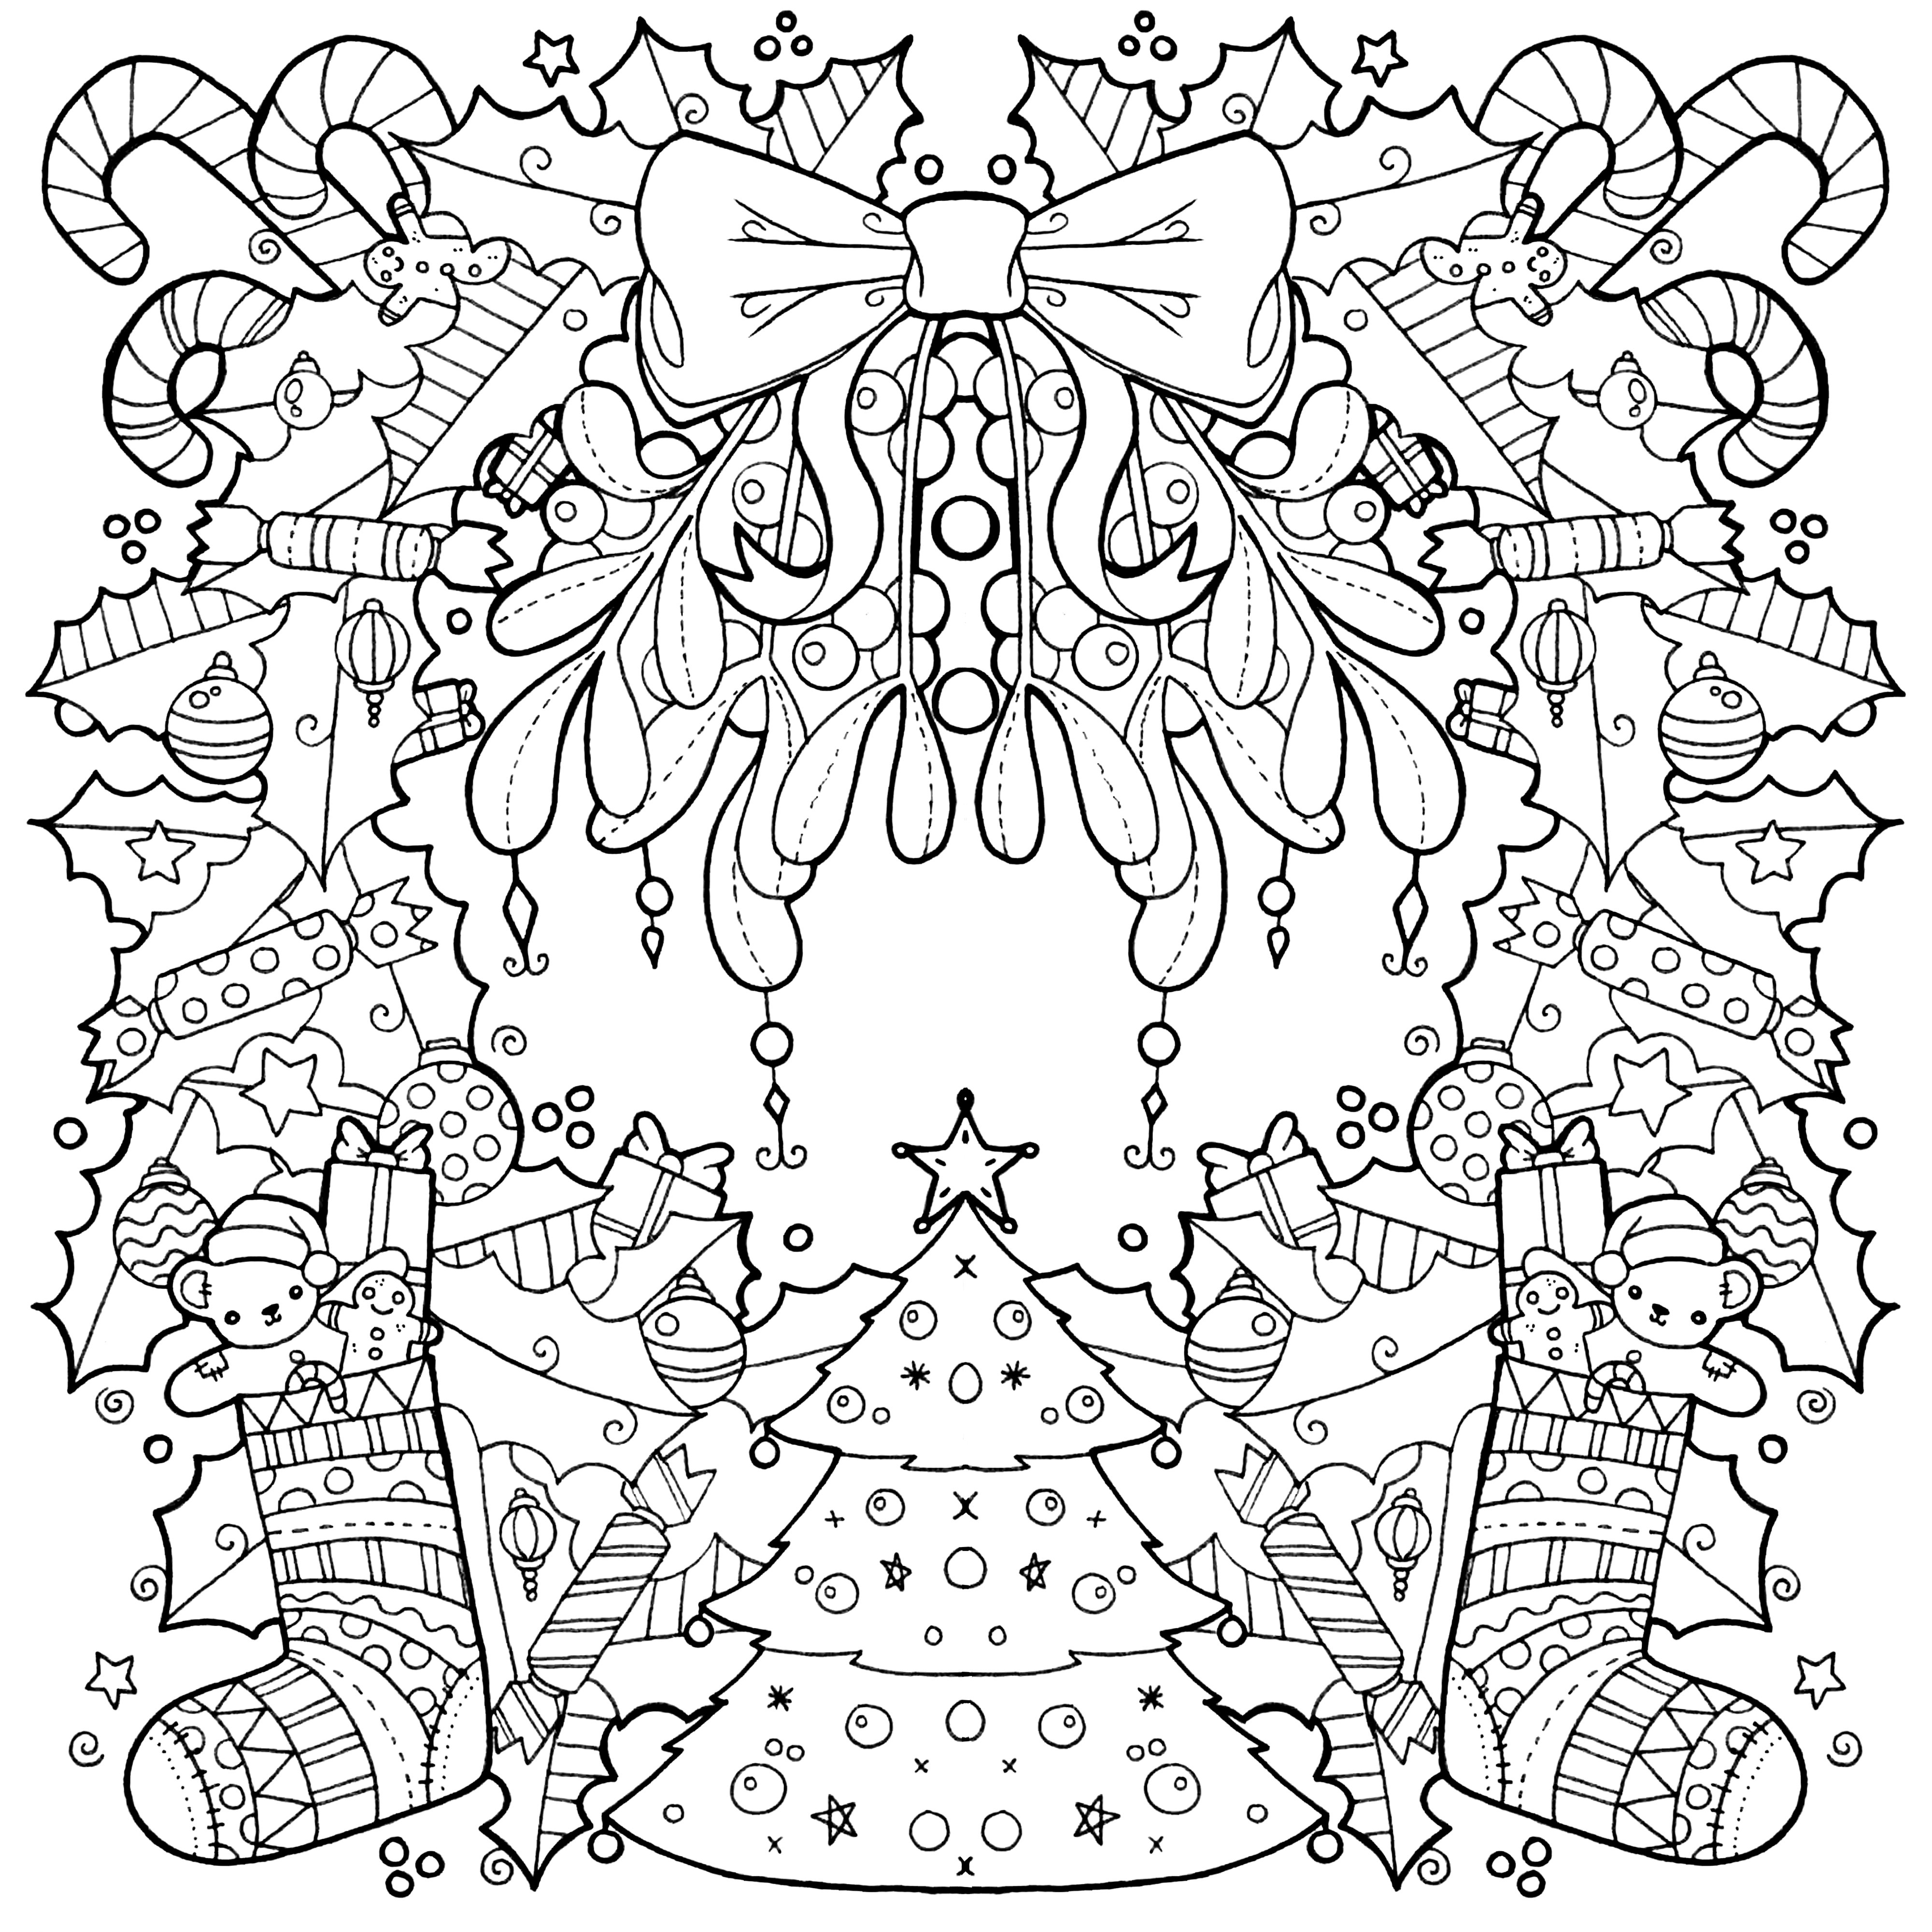 mindfulness-coloring-christmas-paper-chains-coloring-pages